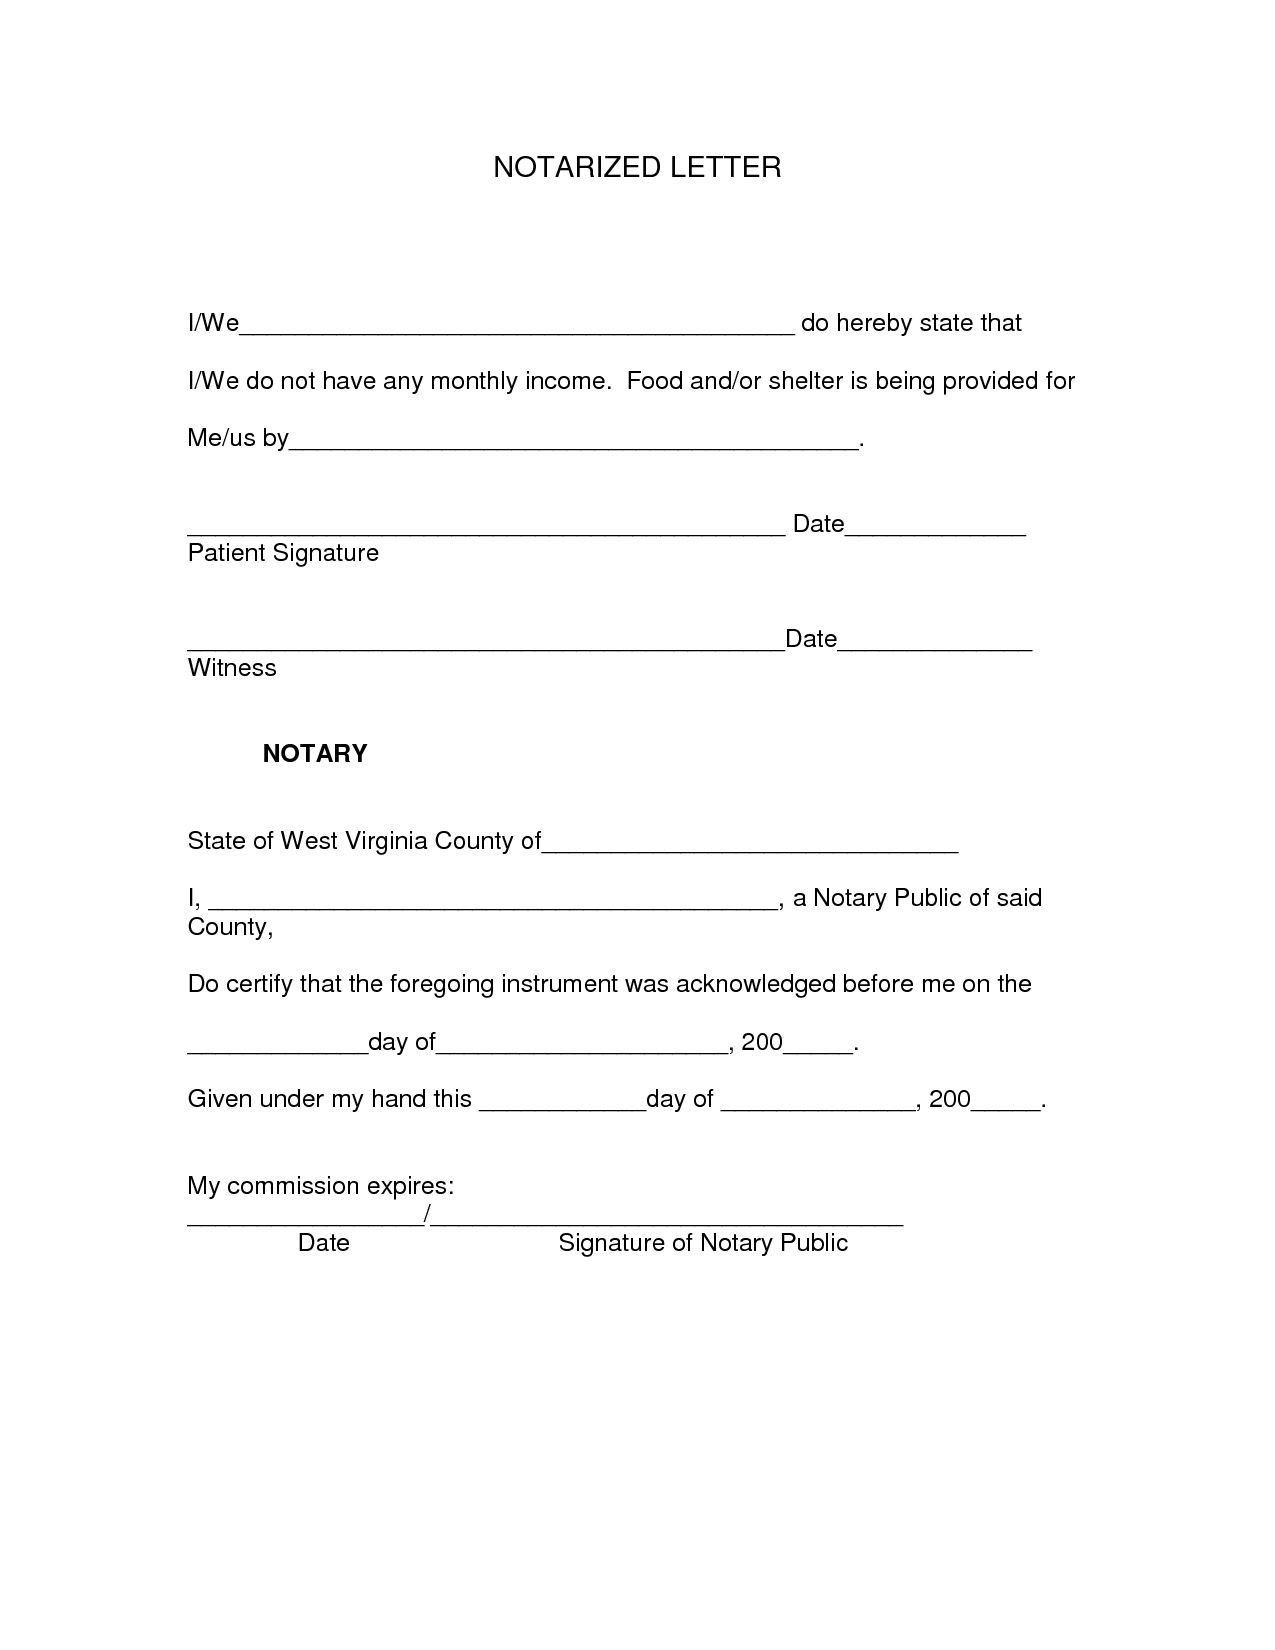 Examples of notarized letters notary letter template crna cover 